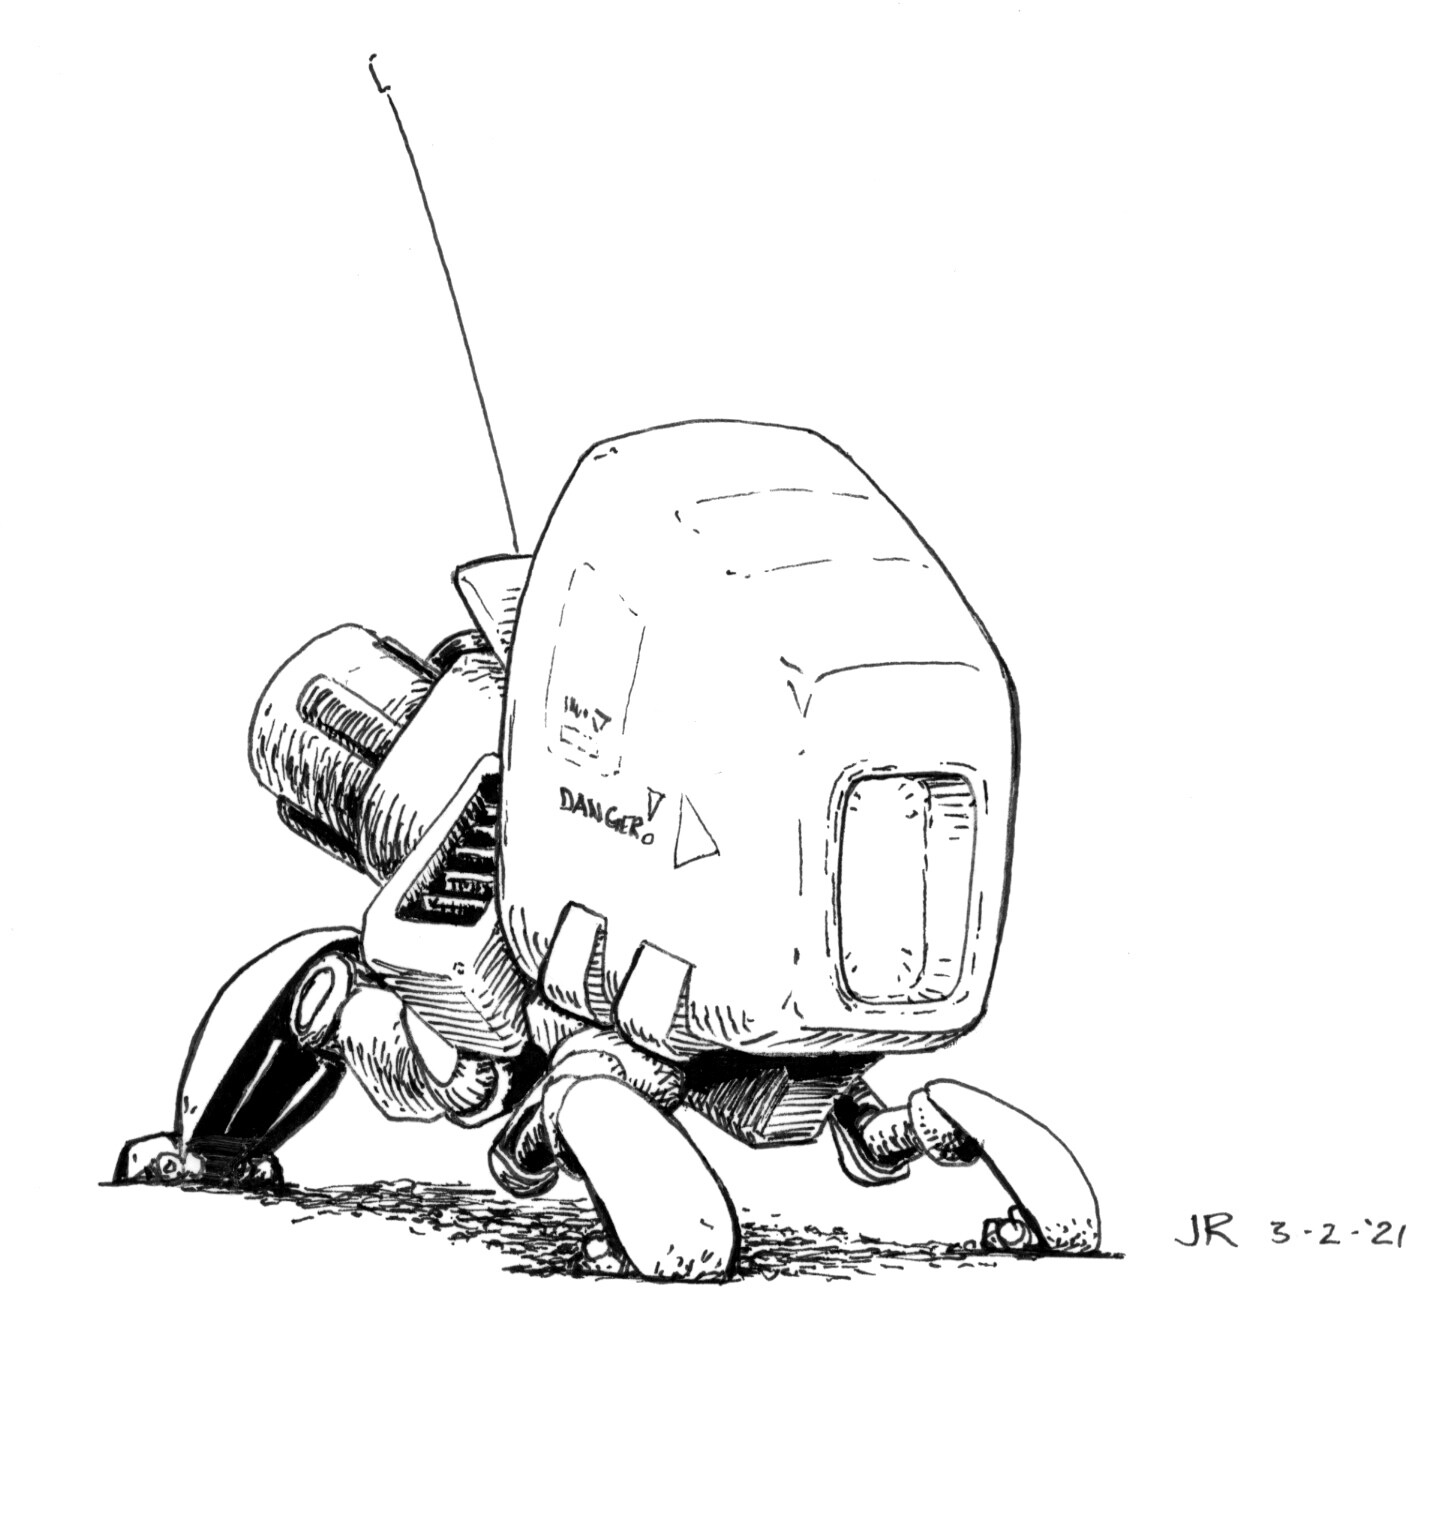 March of Robots 2021. Day 2. Cannon.